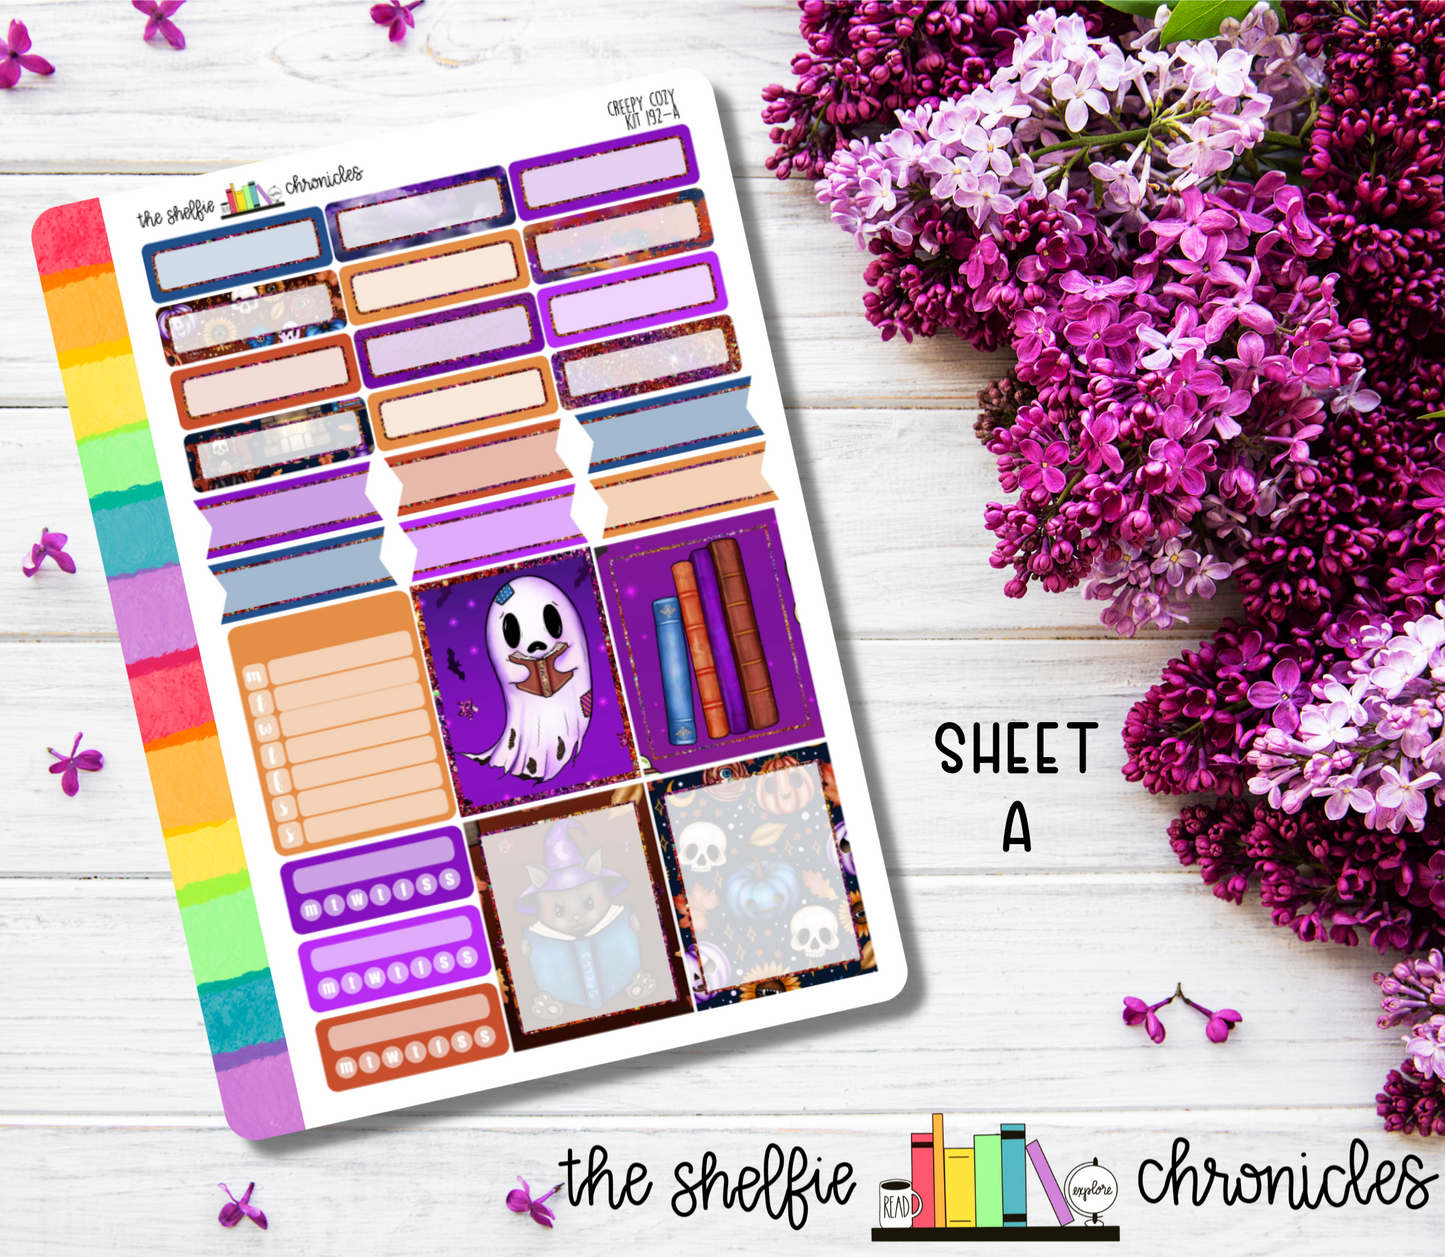 Kit 192 - Creepy Cozy Weekly Kit - Die Cut Stickers - Repositionable Paper - Made To Fit 7x9 Planners